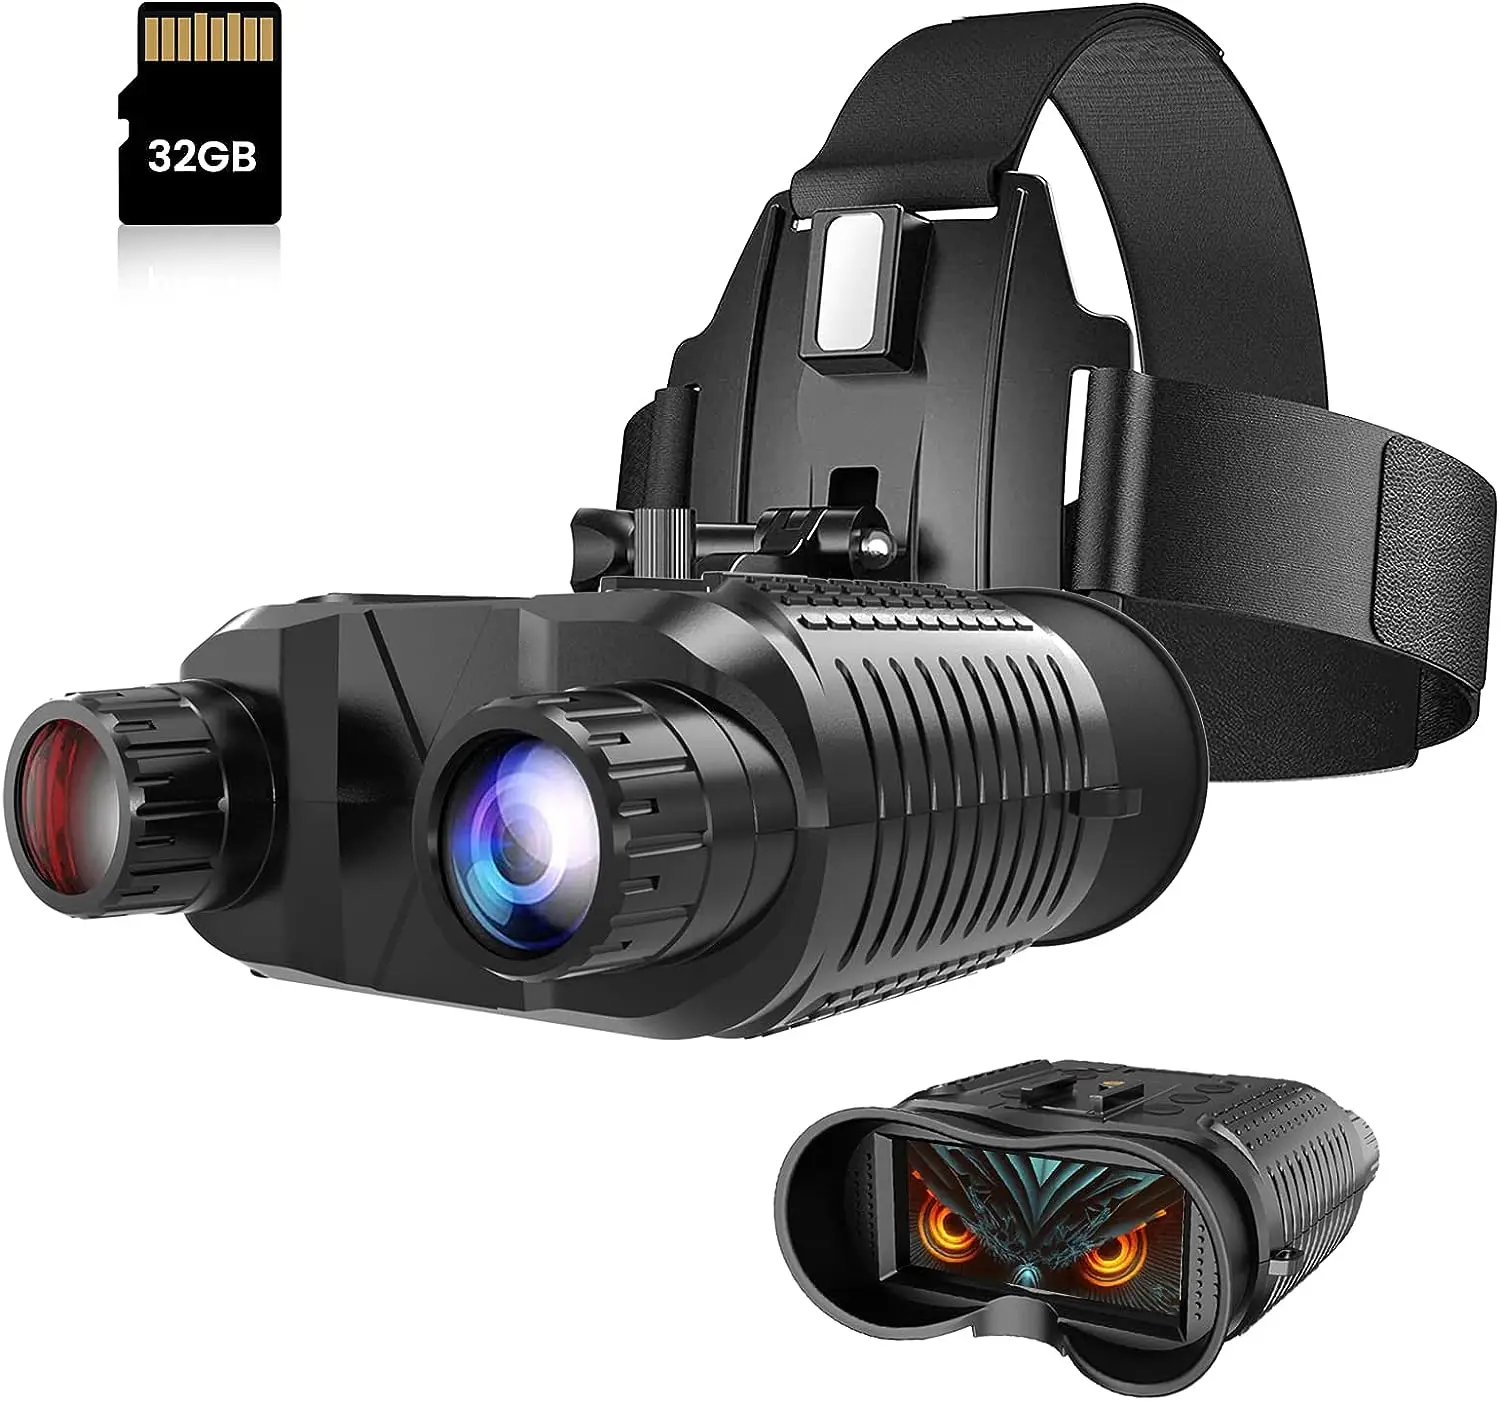 

Vision Goggles-Night Vision Binoculars for Adults,-Mounted Night Vision Goggles,1312FT Digital Infrared Night Vision,Compatible